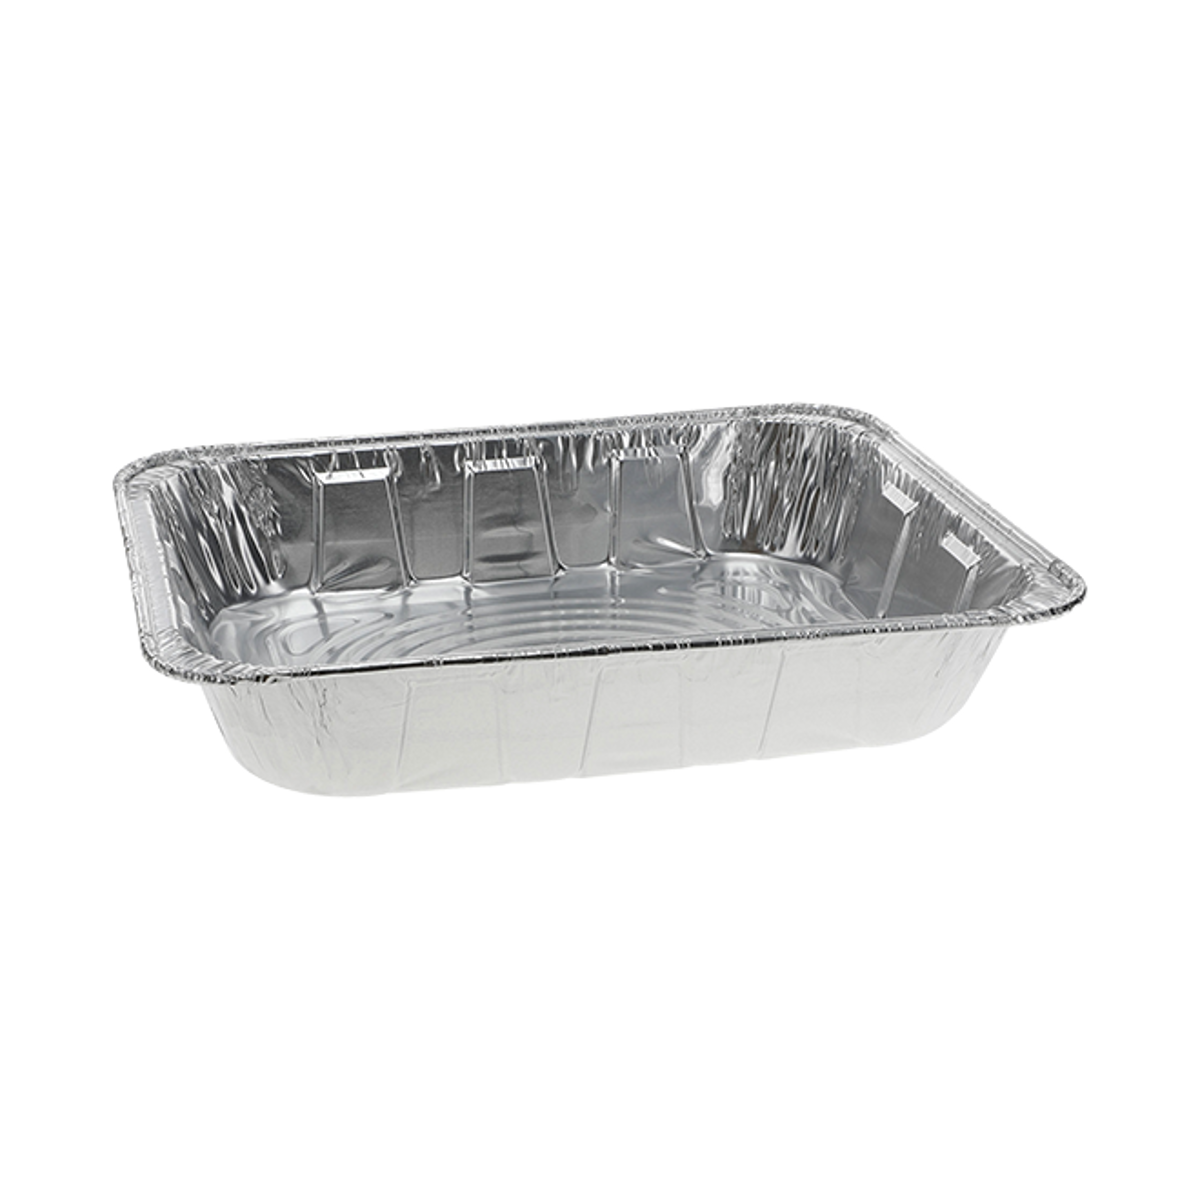 6 Pack Stainless Steel Tray UPGRADE 12 x 13 Compatible With Ivation –